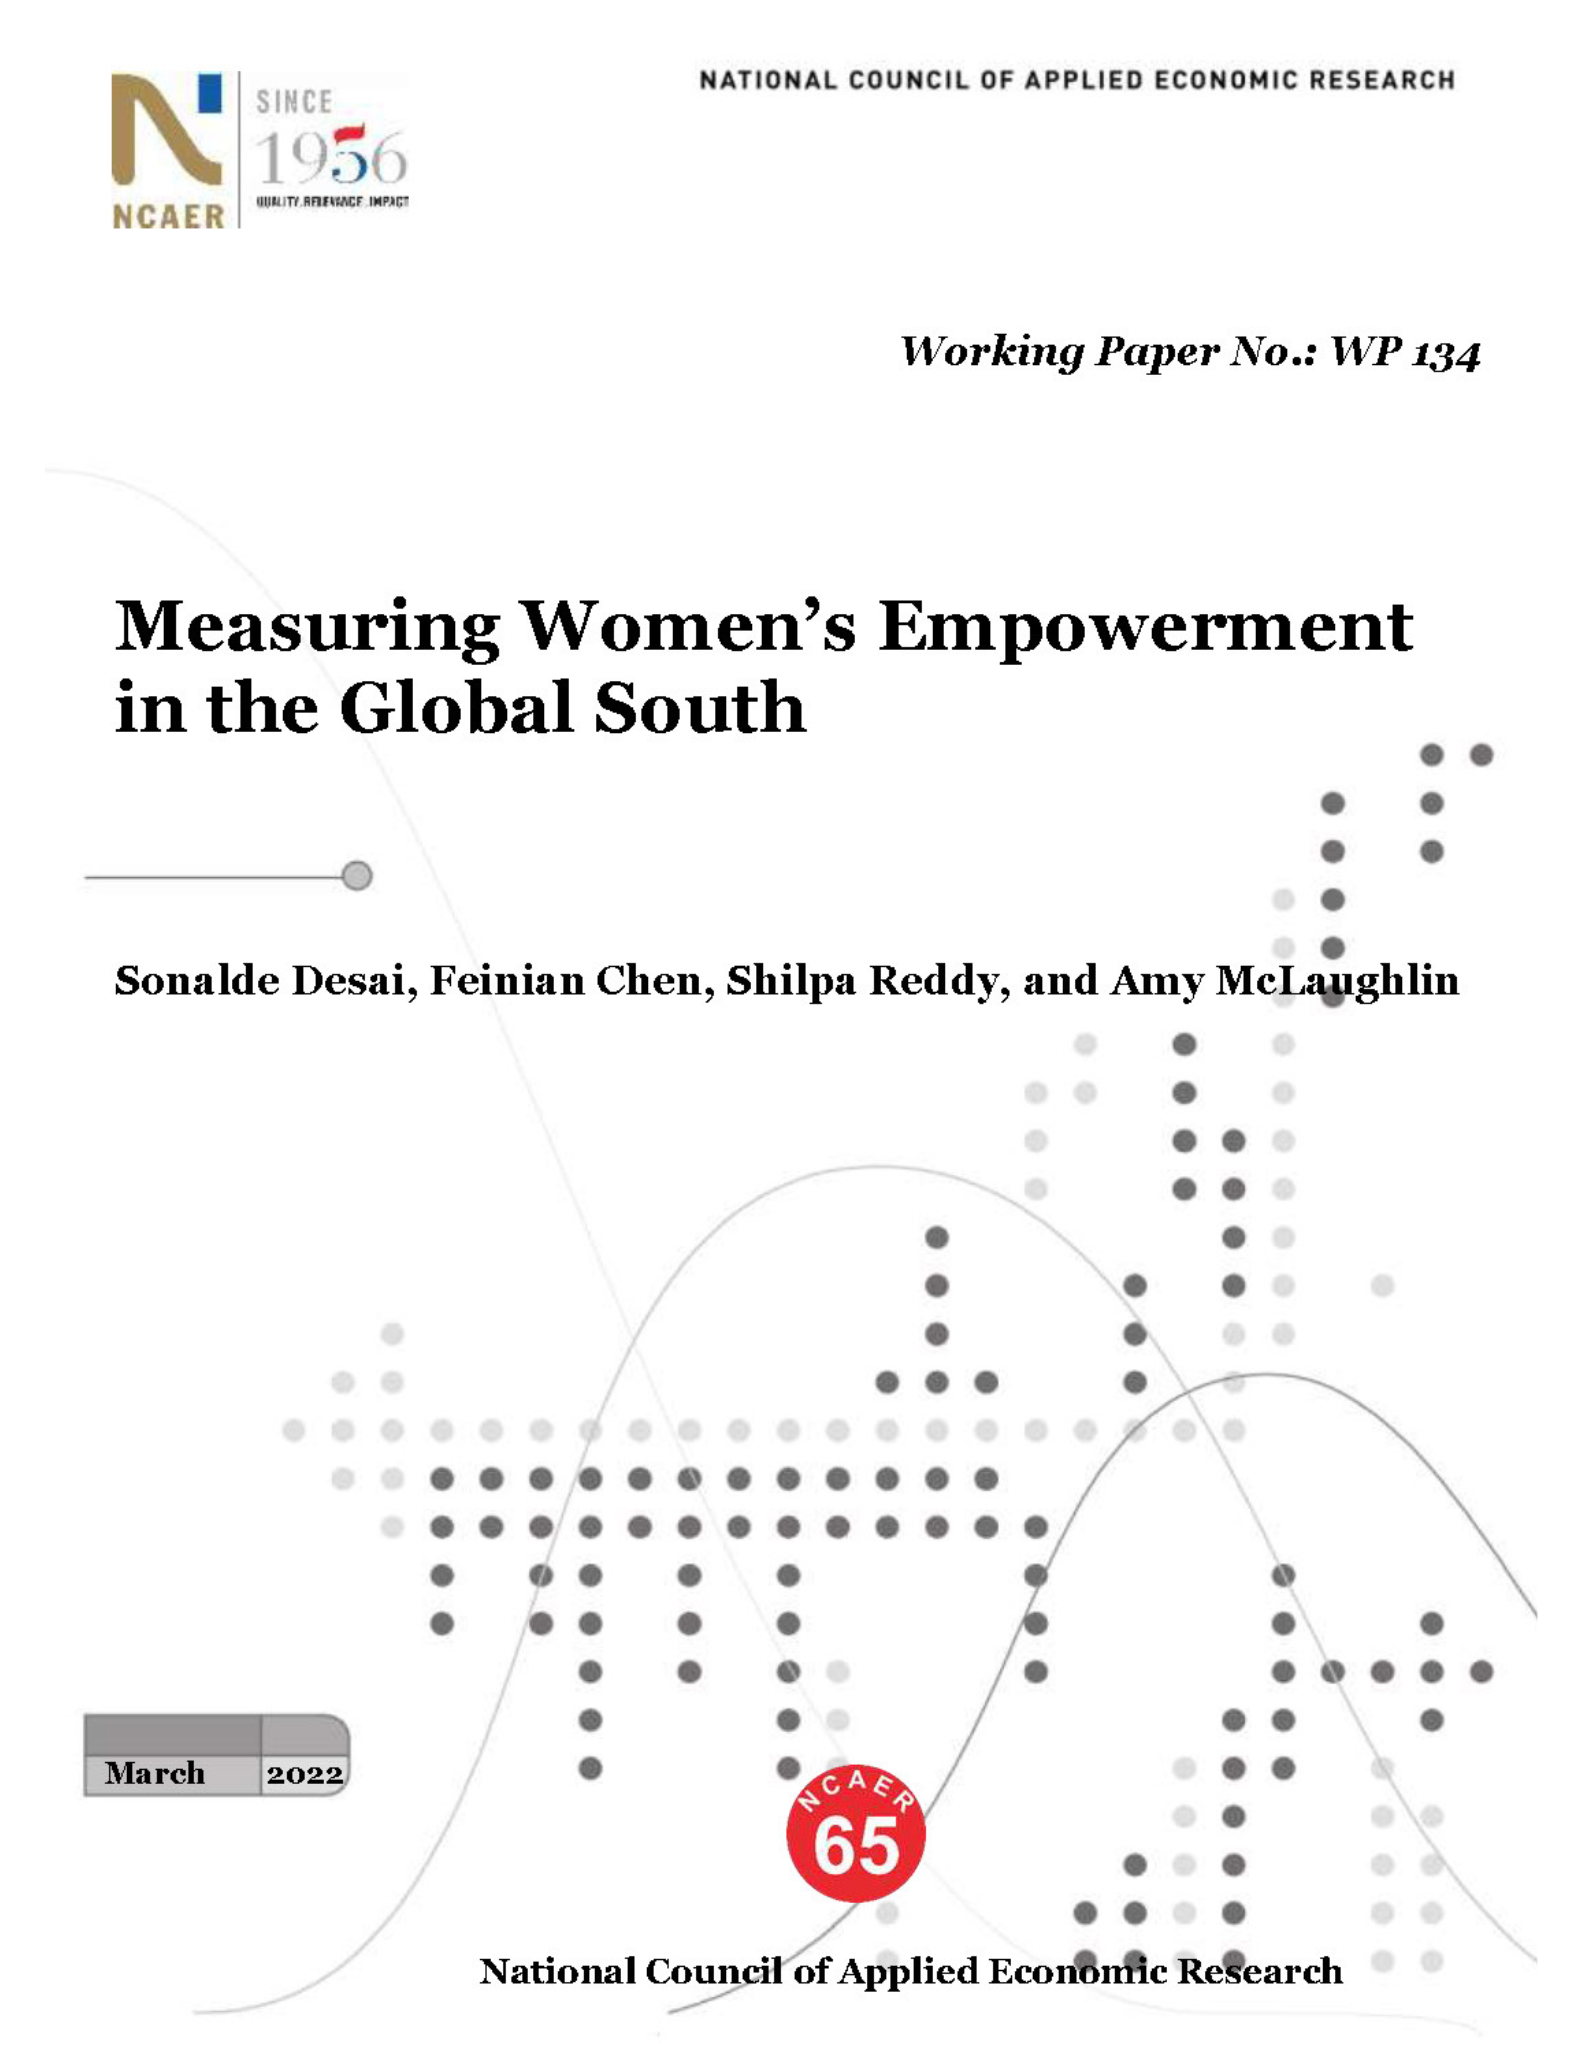 Measuring Women’s Empowerment in the Global South